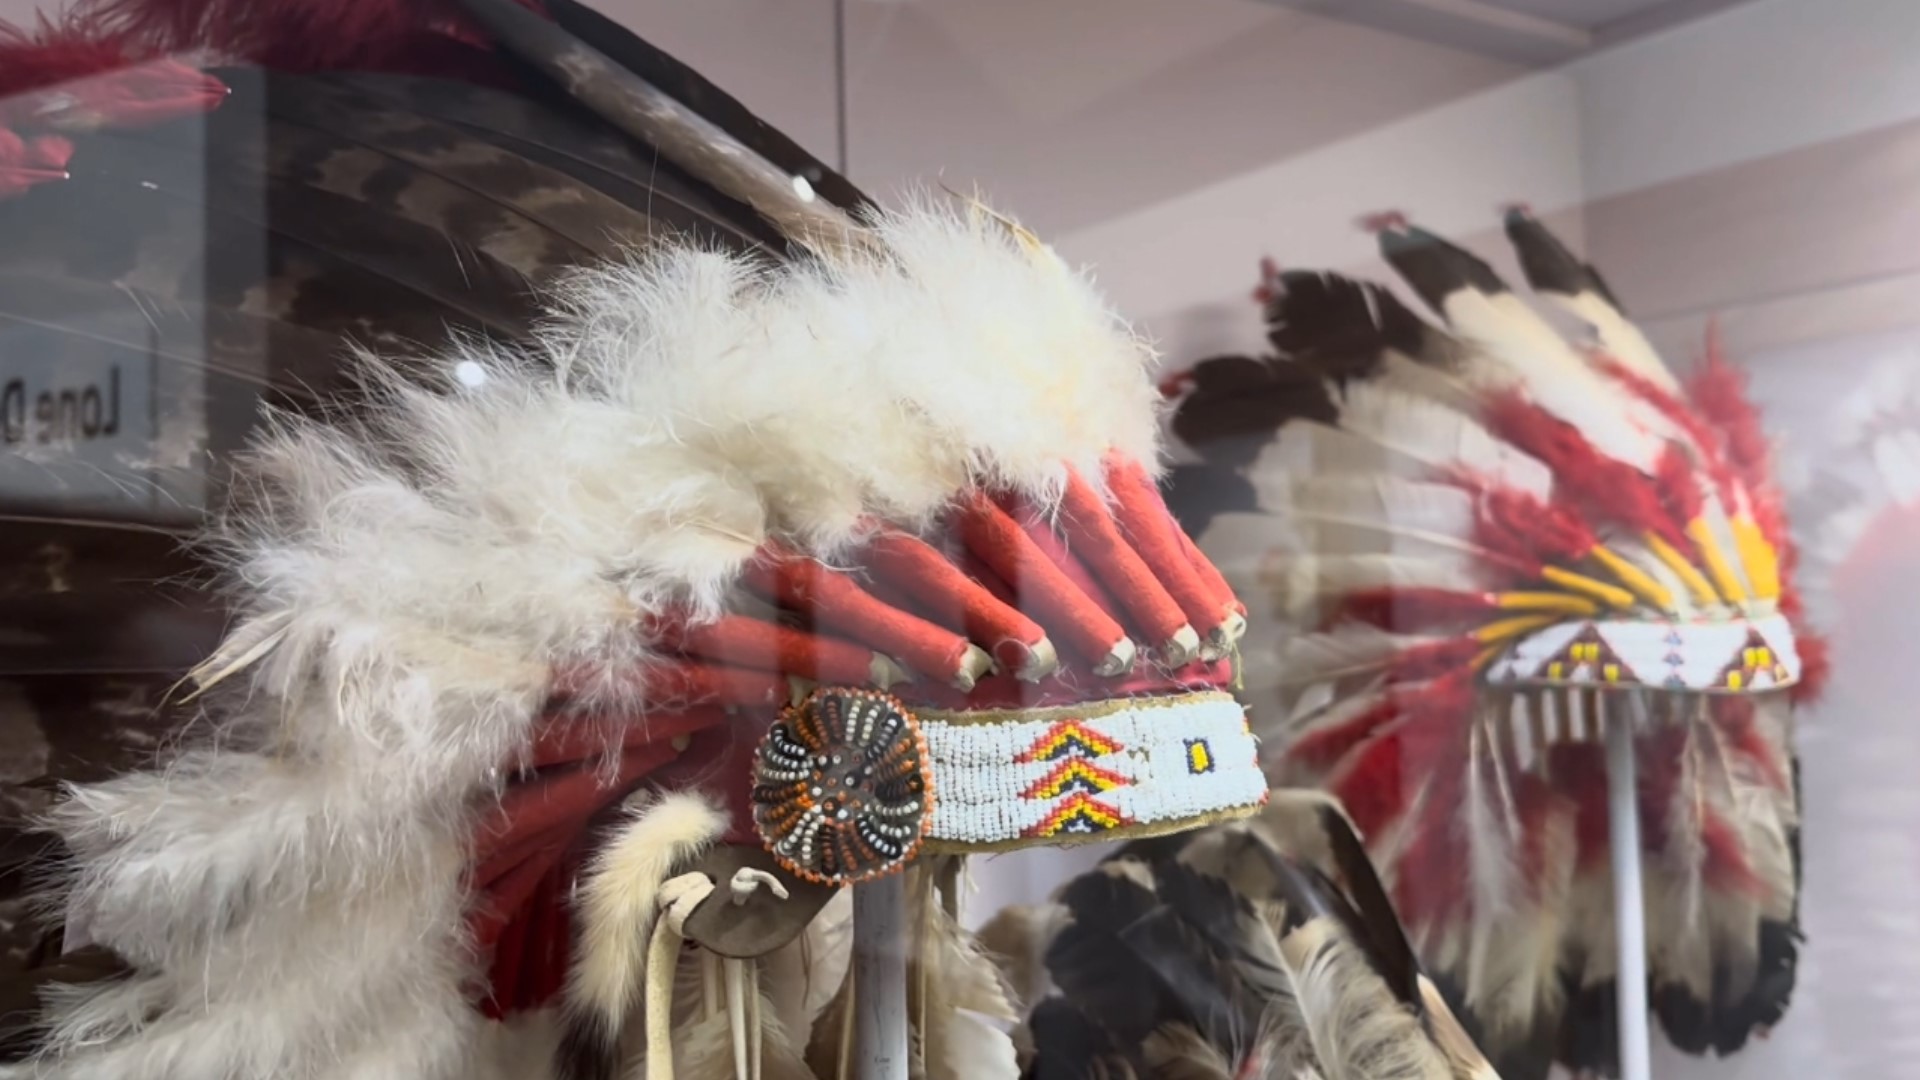 The Museum of Native American History in Bentonville holds interesting history, artifacts, and activities that has even sparked the interest of the movie industry.